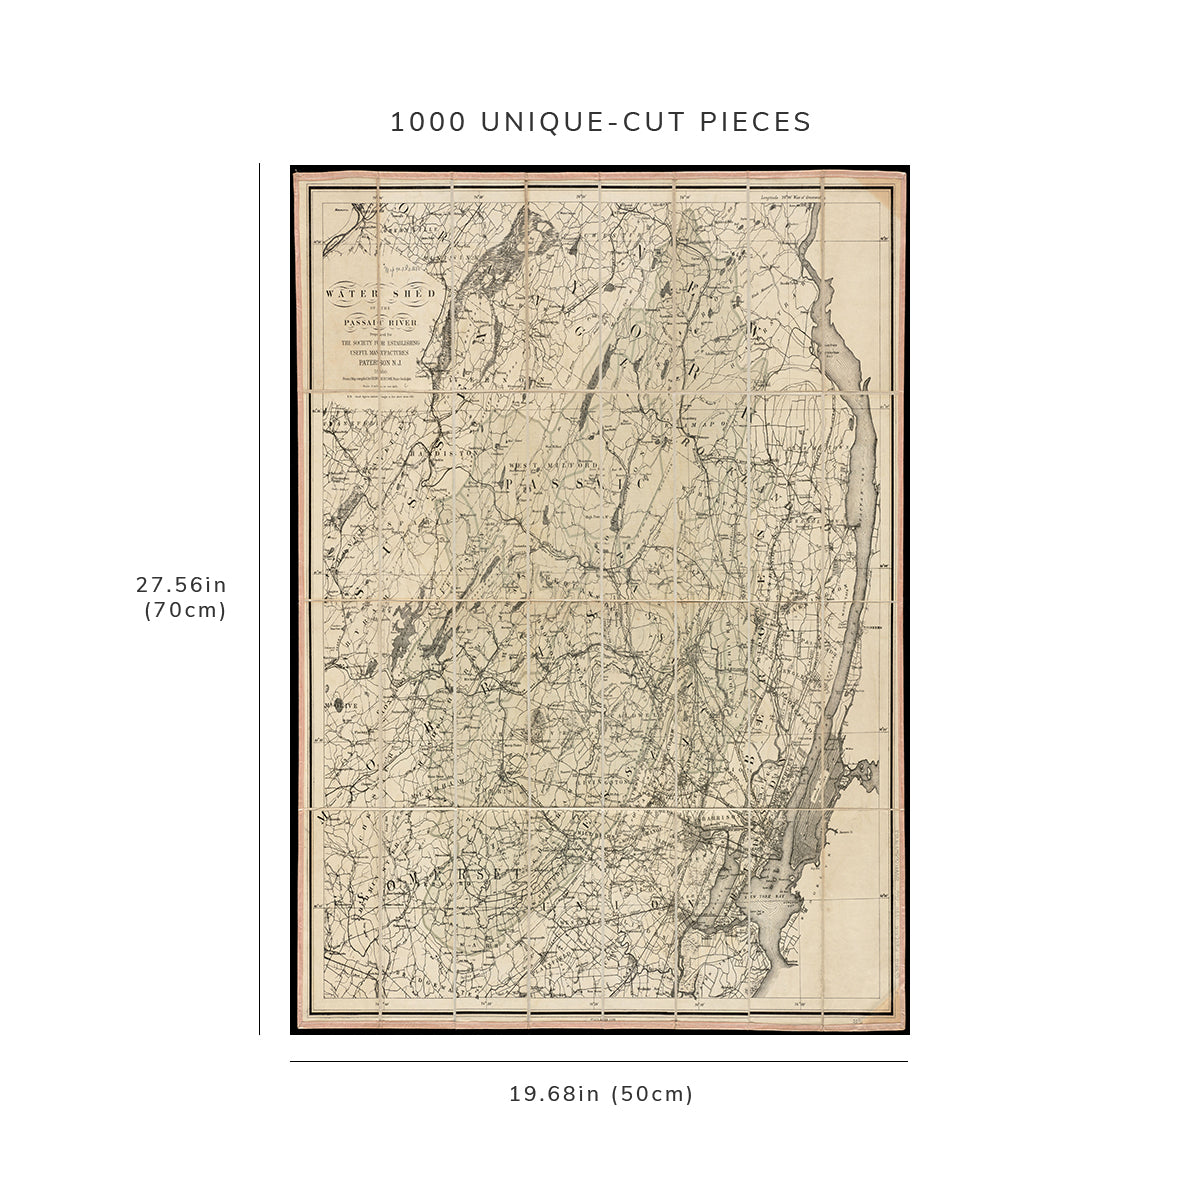 1000 Piece Jigsaw Puzzle: 1880 Map New Jersey | Passaic (river) | Water shed of the Pass